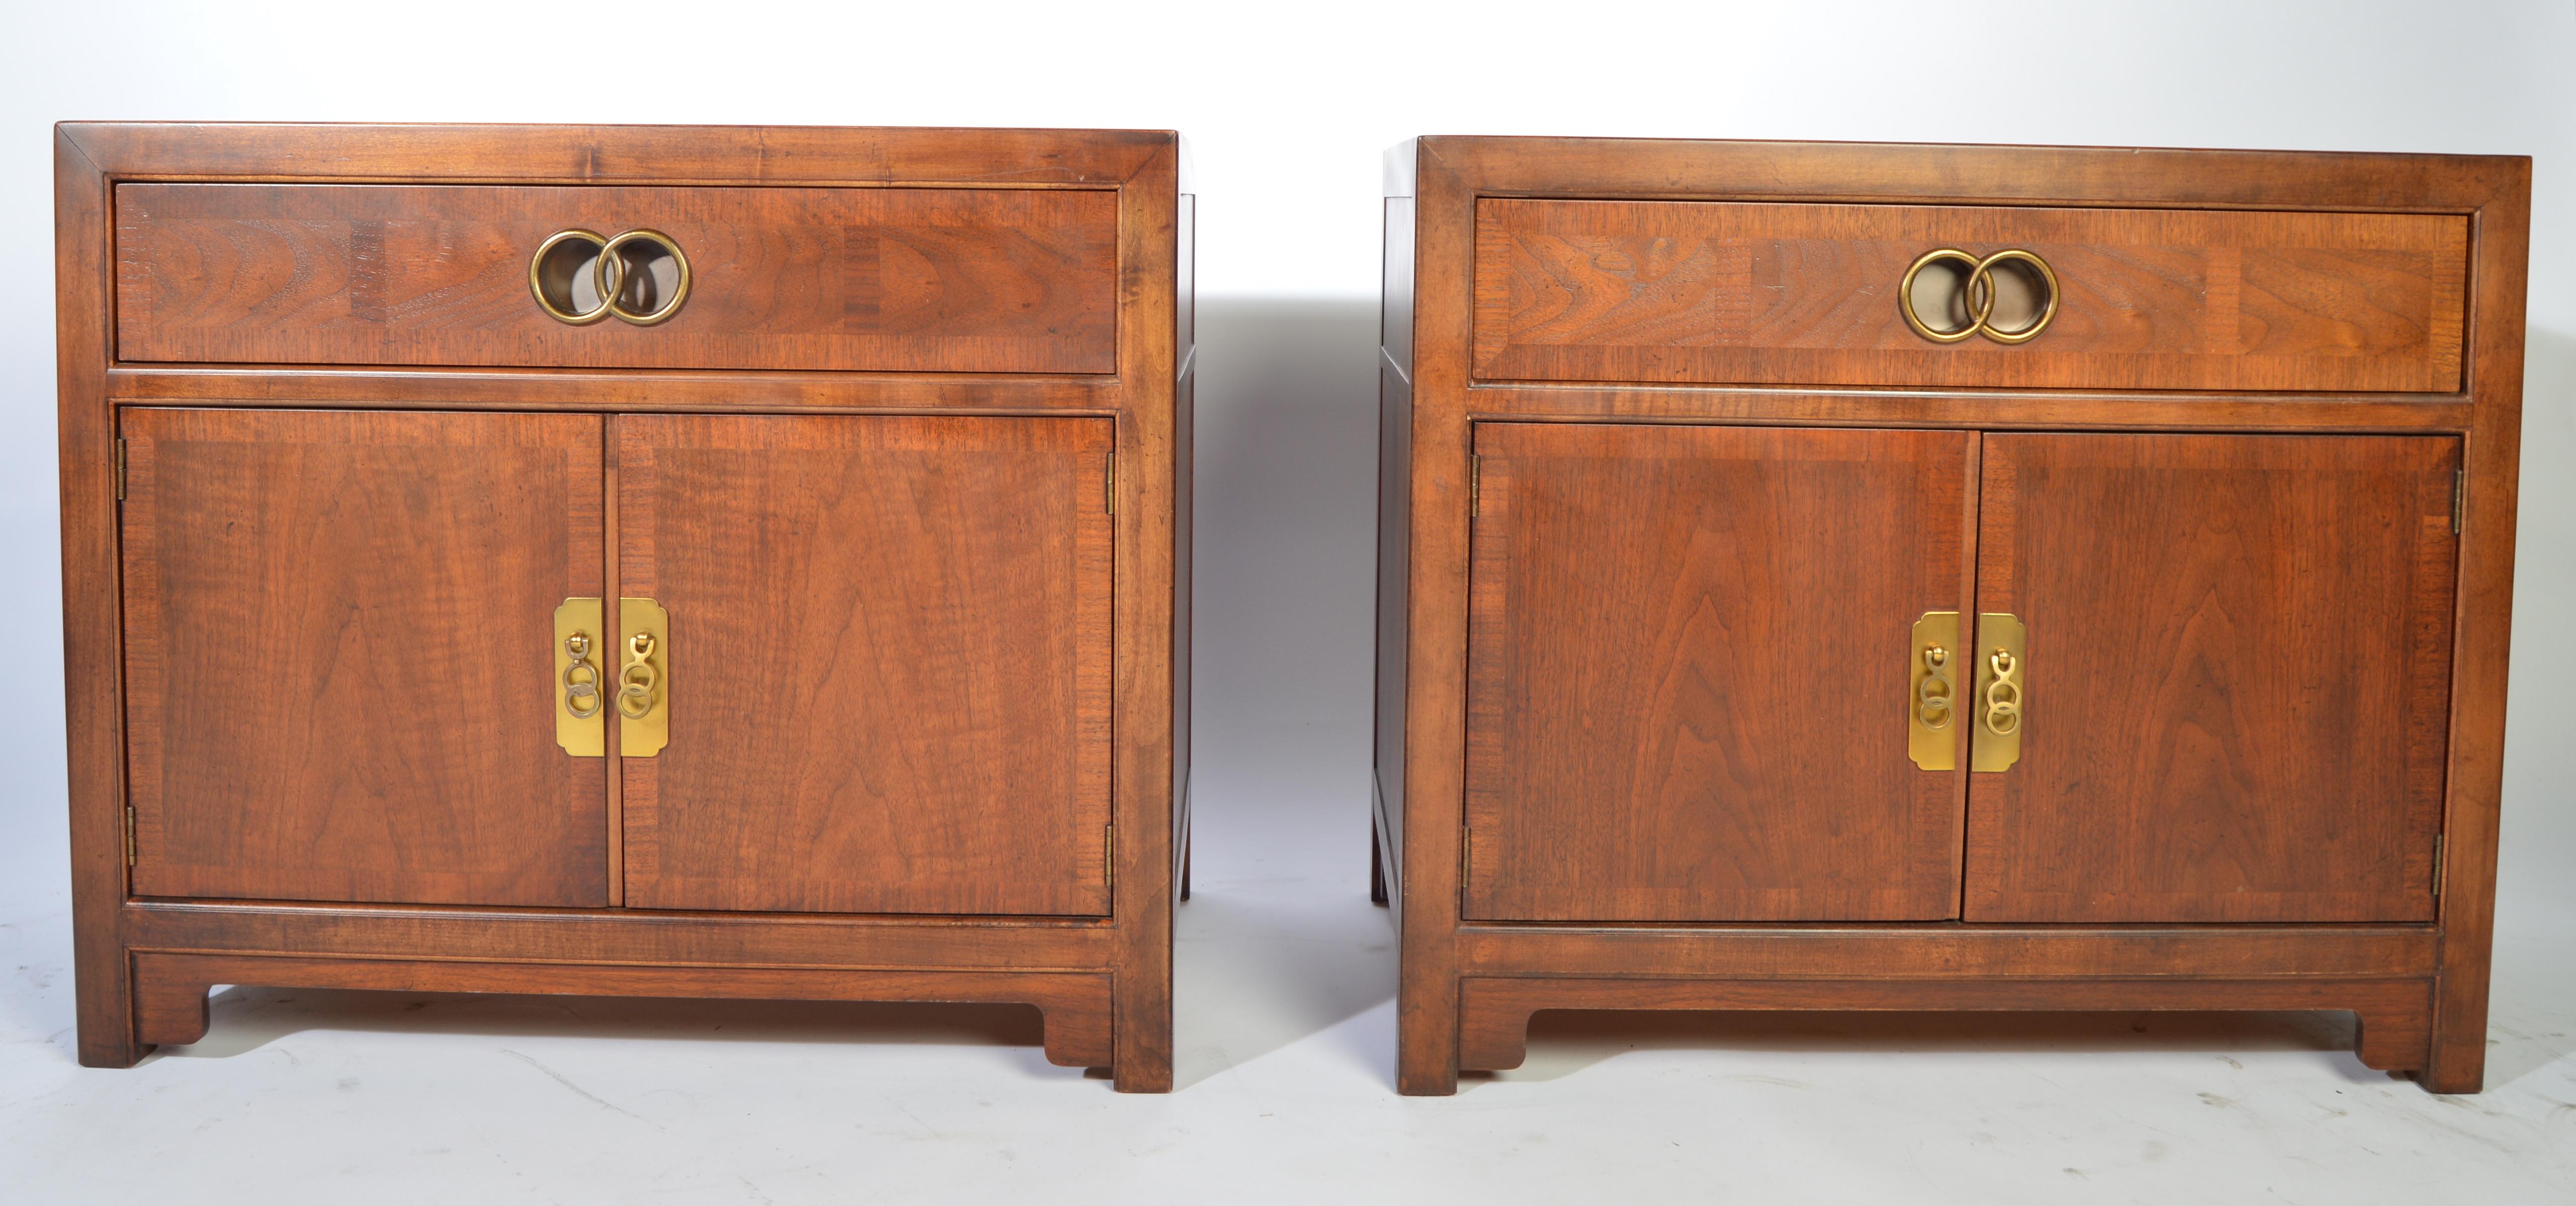 A pair of Baker nightstands designed by Michael Taylor for their Far East collection having brass pulls with signature behind each. Constructed with a blend of mahogany and walnut,
circa 1955
In outstanding condition throughout. Masterfully